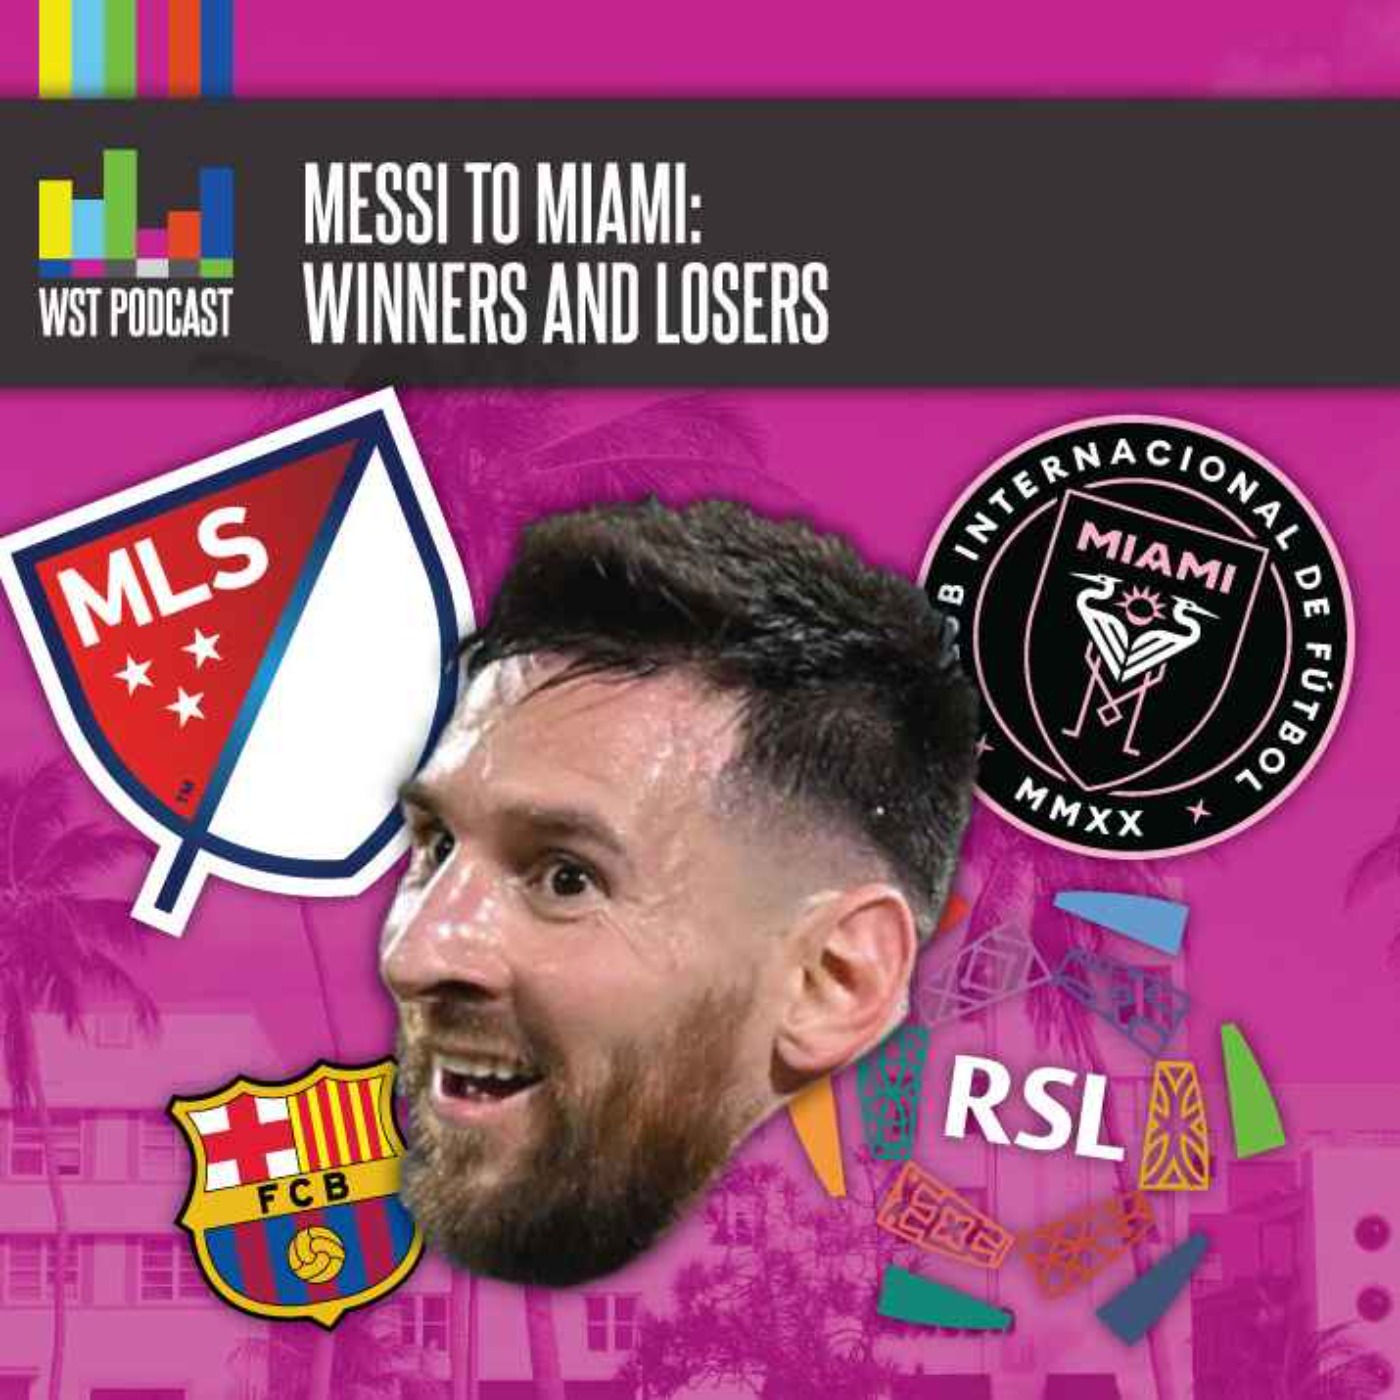 Messi to Miami: Winners and Losers